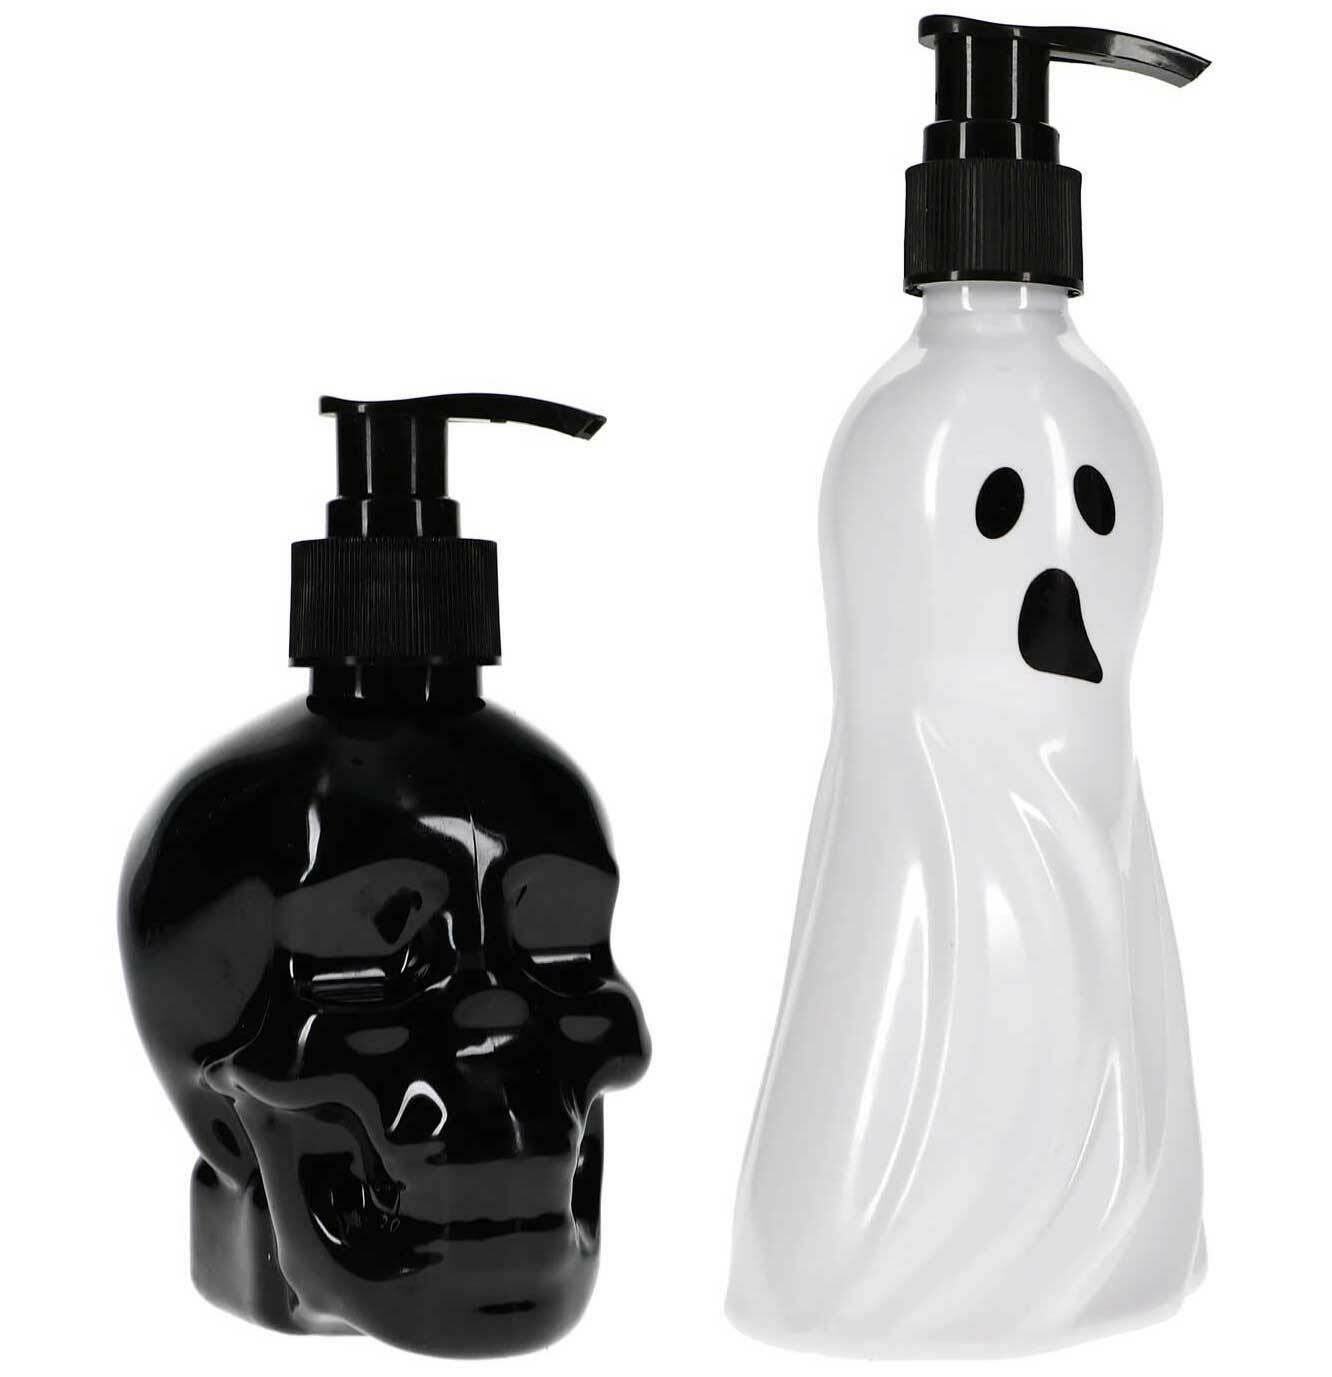 24 Halloween Shaped Coconut Lime-Scented Hand Soap, 8.6-oz Bottles at Dollar Tree